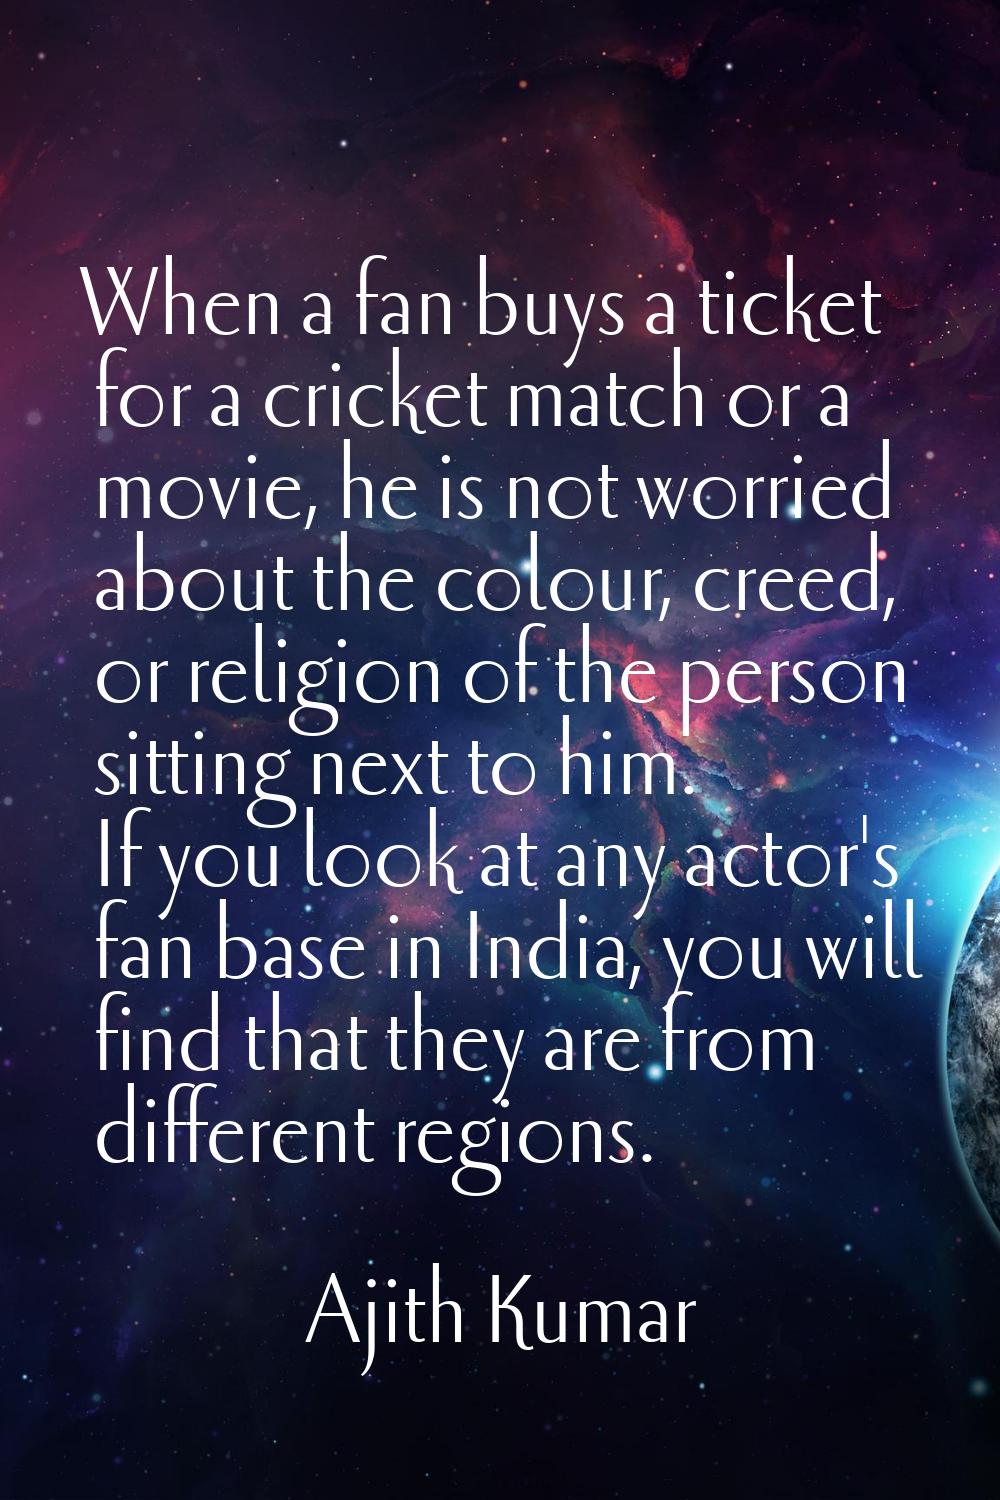 When a fan buys a ticket for a cricket match or a movie, he is not worried about the colour, creed,